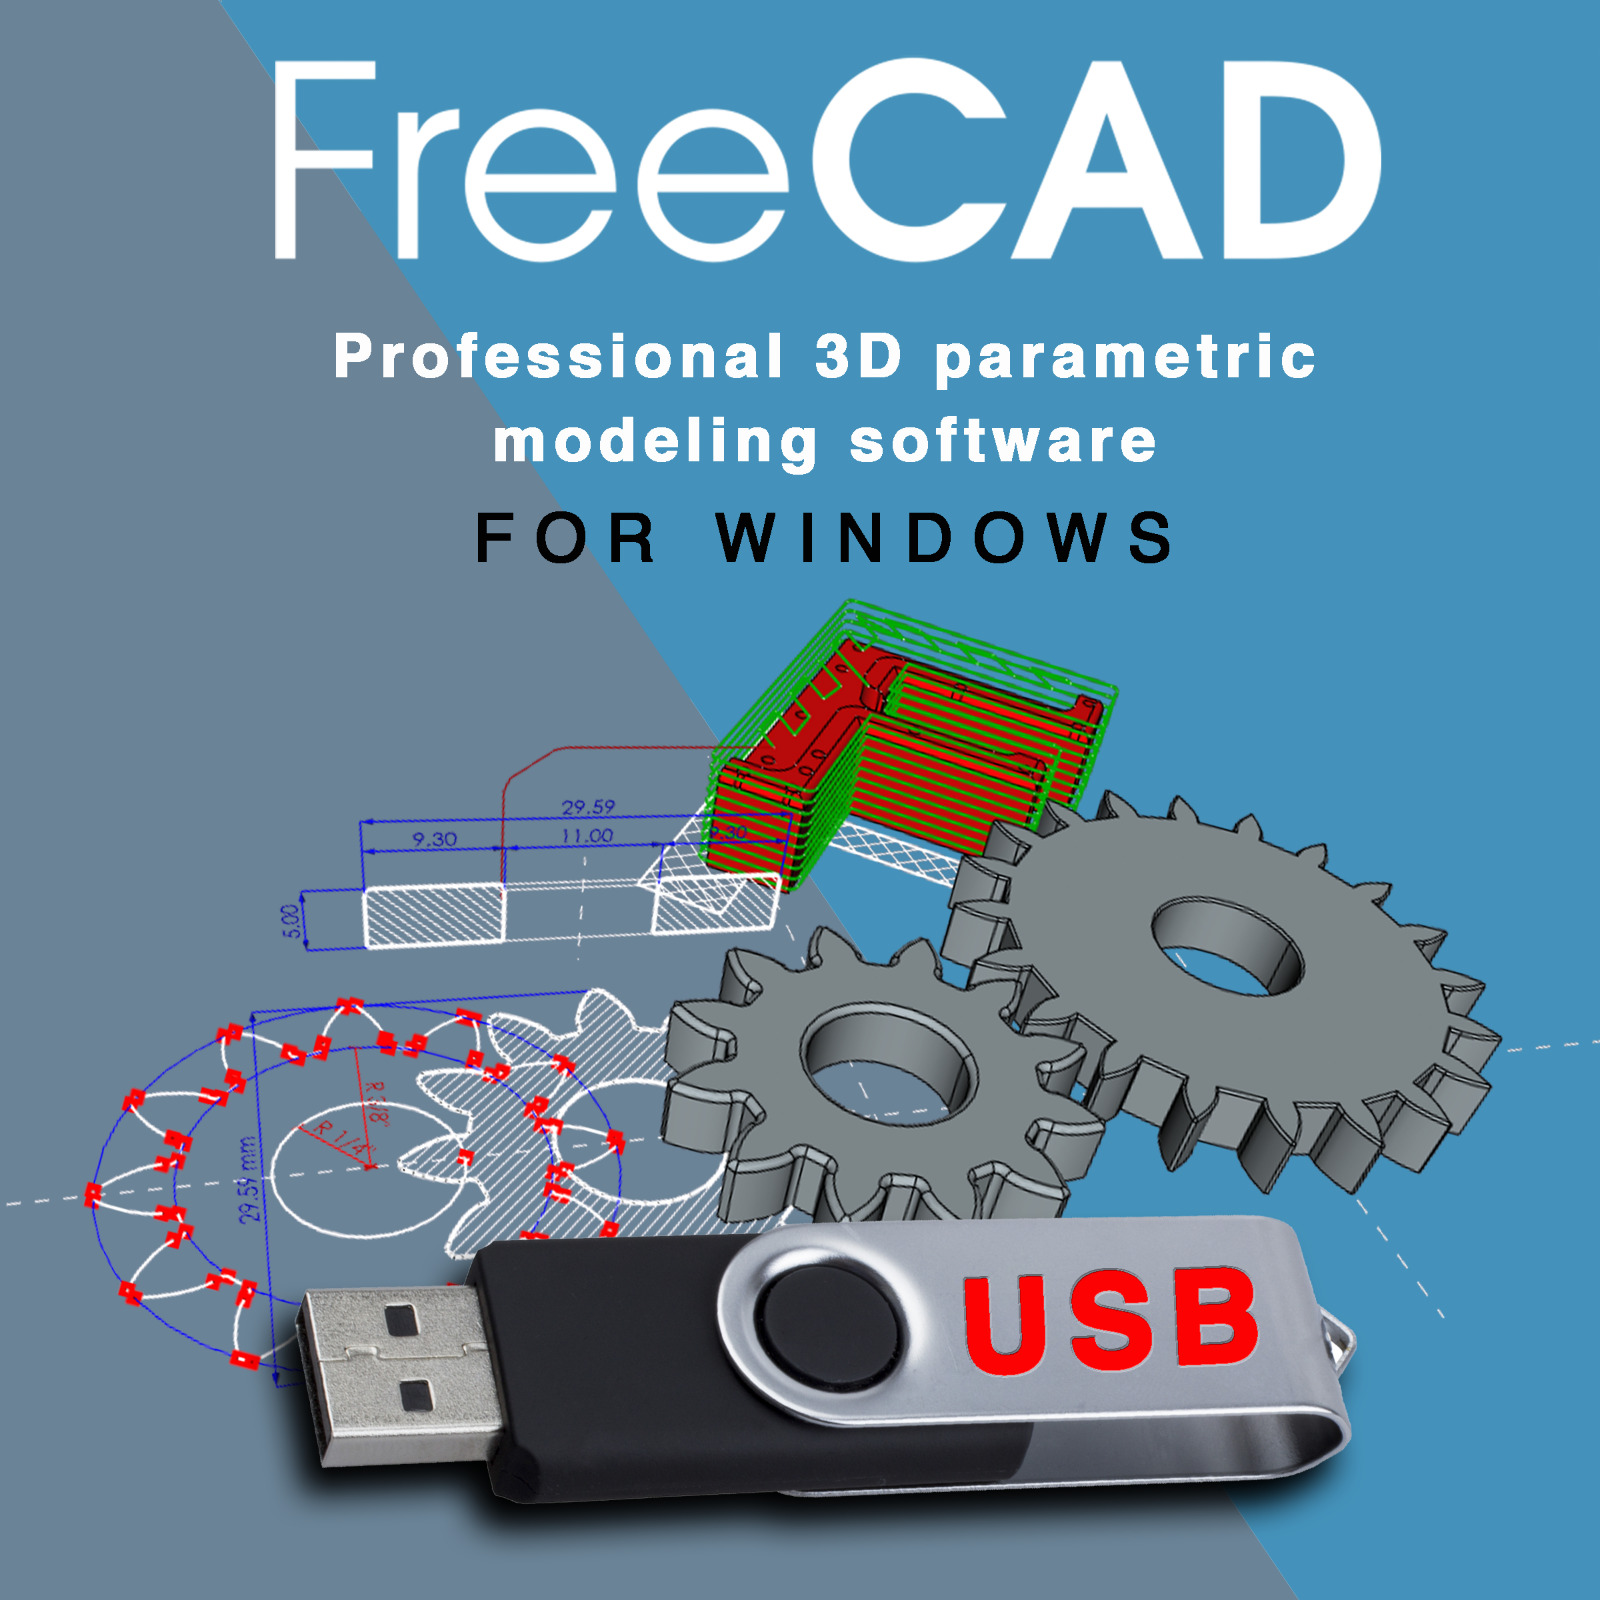 FreeCAD Professional 2D 3D Parametric Graphic Modeling Software-DWG-Windows-USB